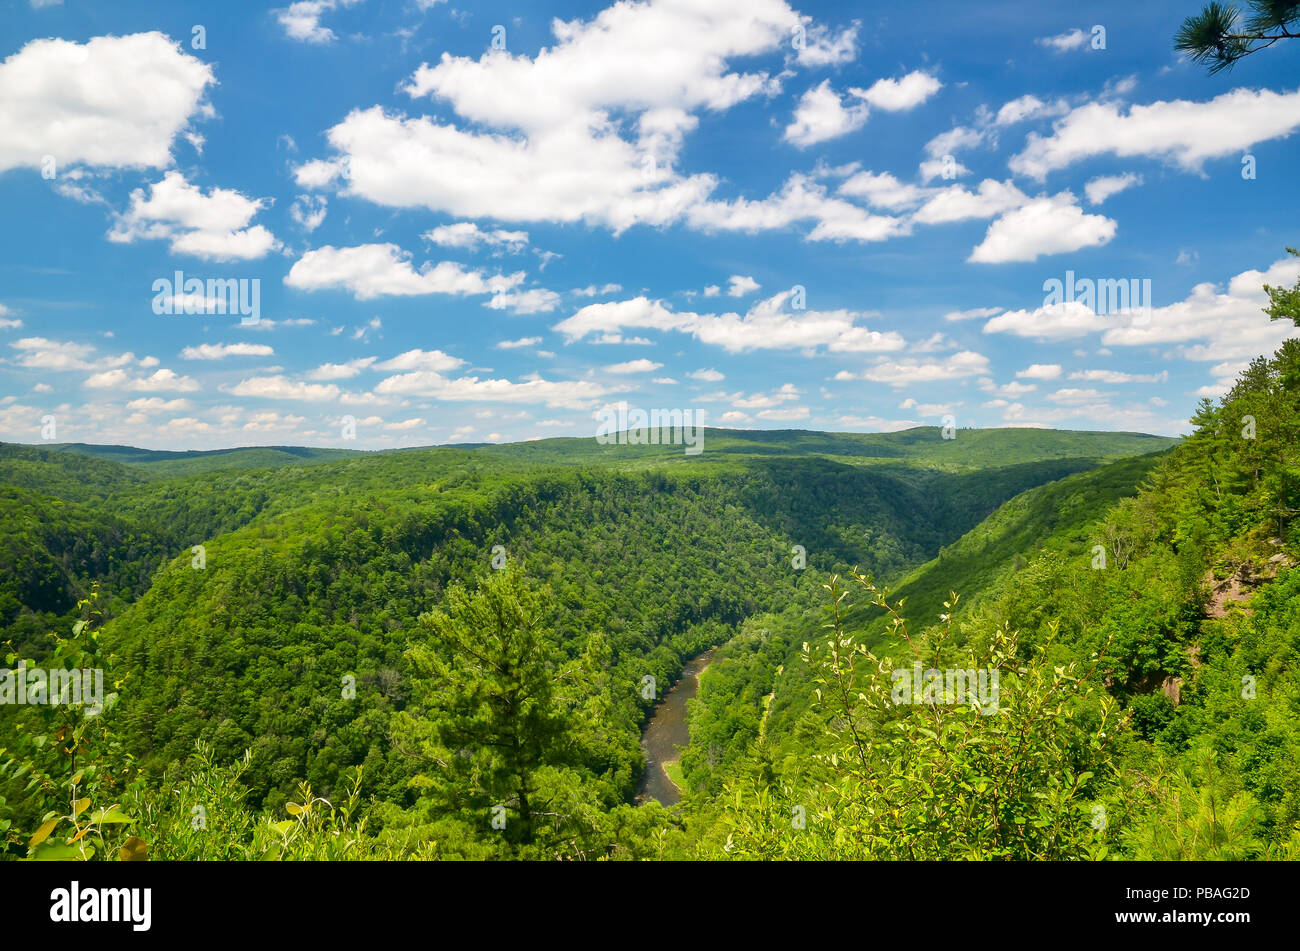 Pine Creek Gorge, also called the Grand Canyon of Pennsylvania. A 47 mile long, 1000 foot deep gorge that winds through north-central Pennsylvania. Stock Photo